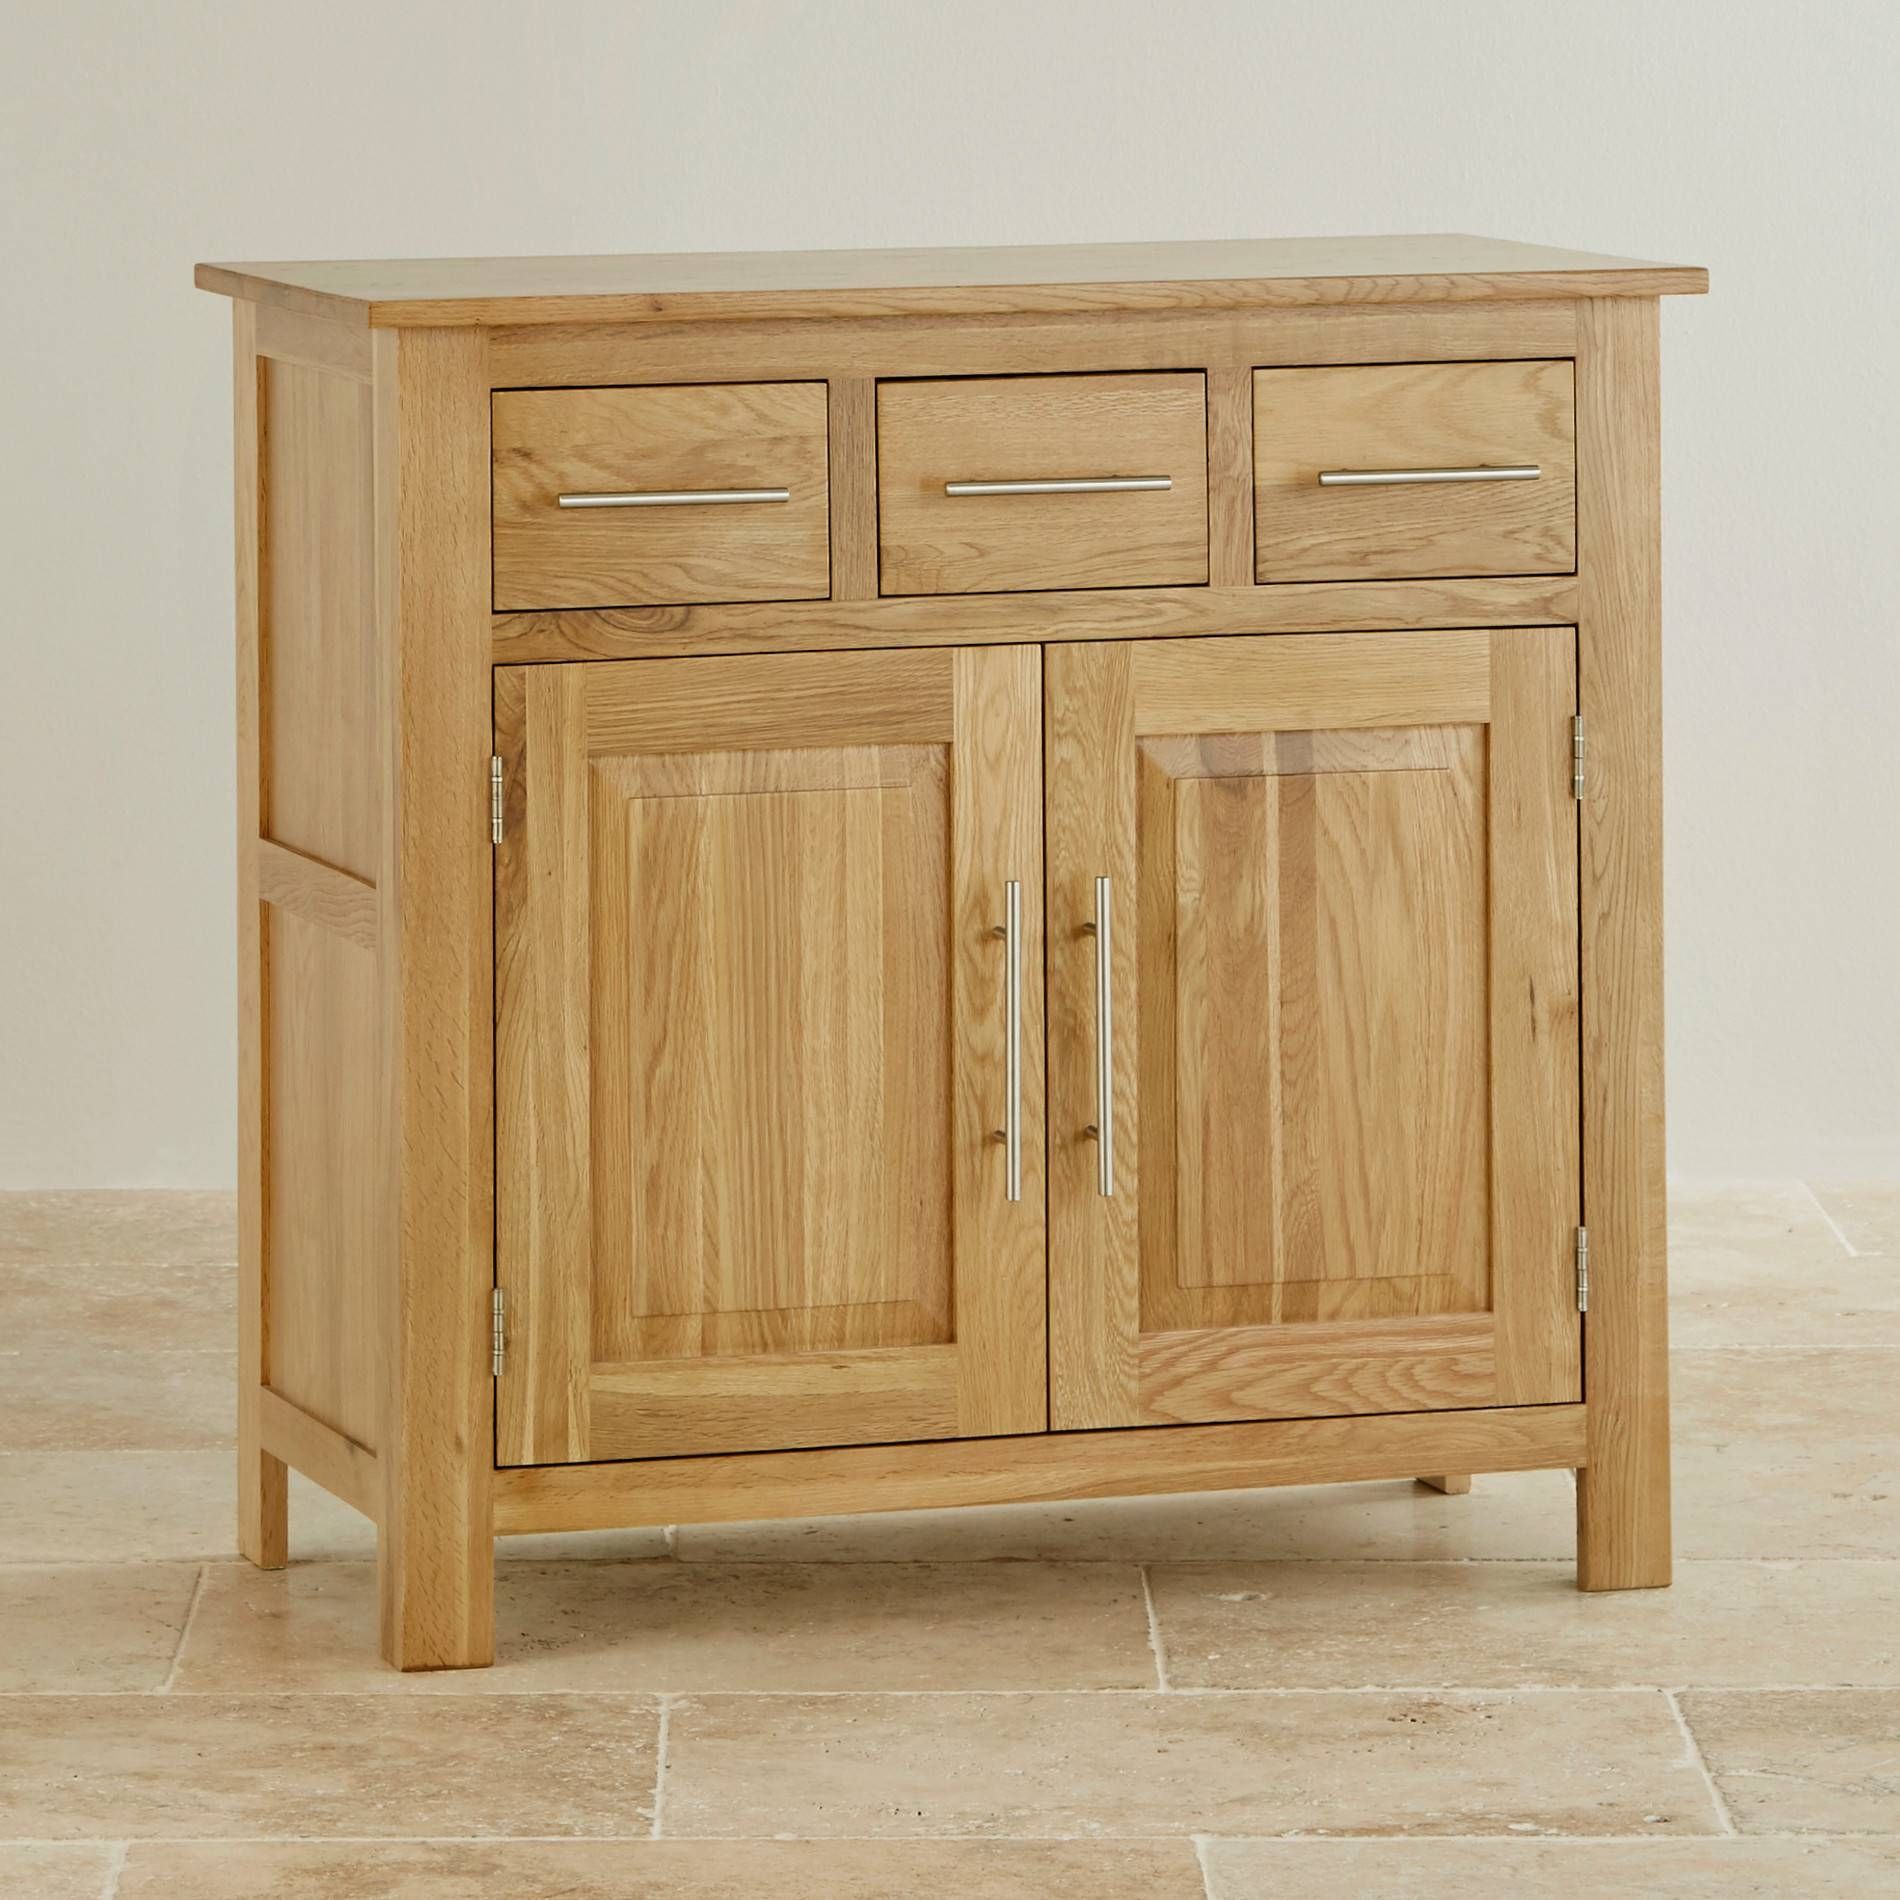 The Rivermead Range – Natural Solid Oak Furniture Throughout Most Popular Chunky Oak Sideboards (Photo 15 of 15)